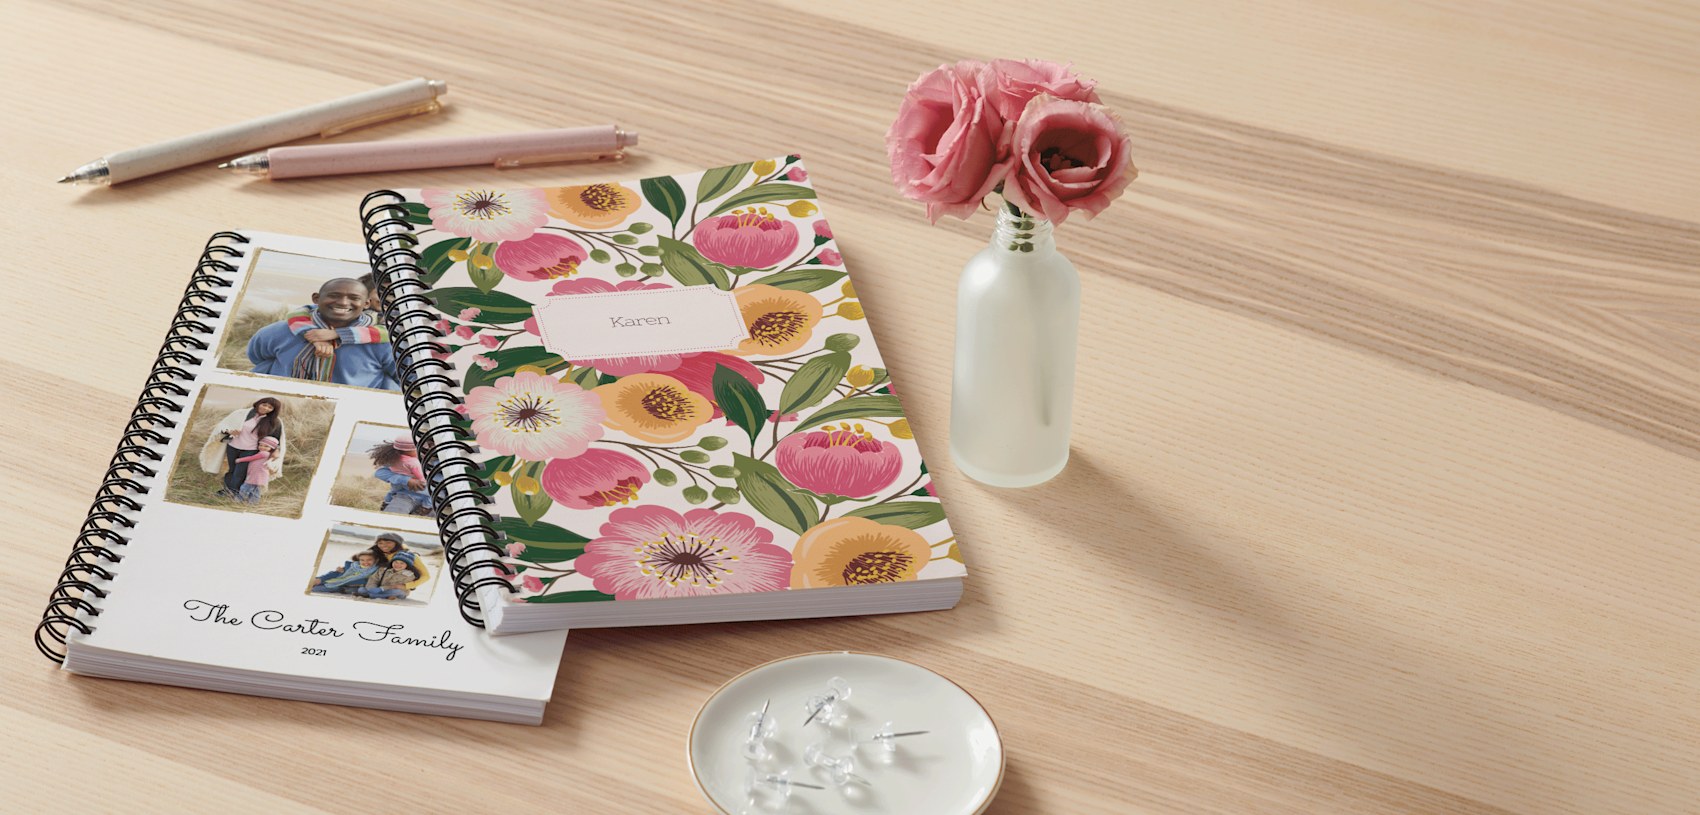 Larger version: Personalised journals